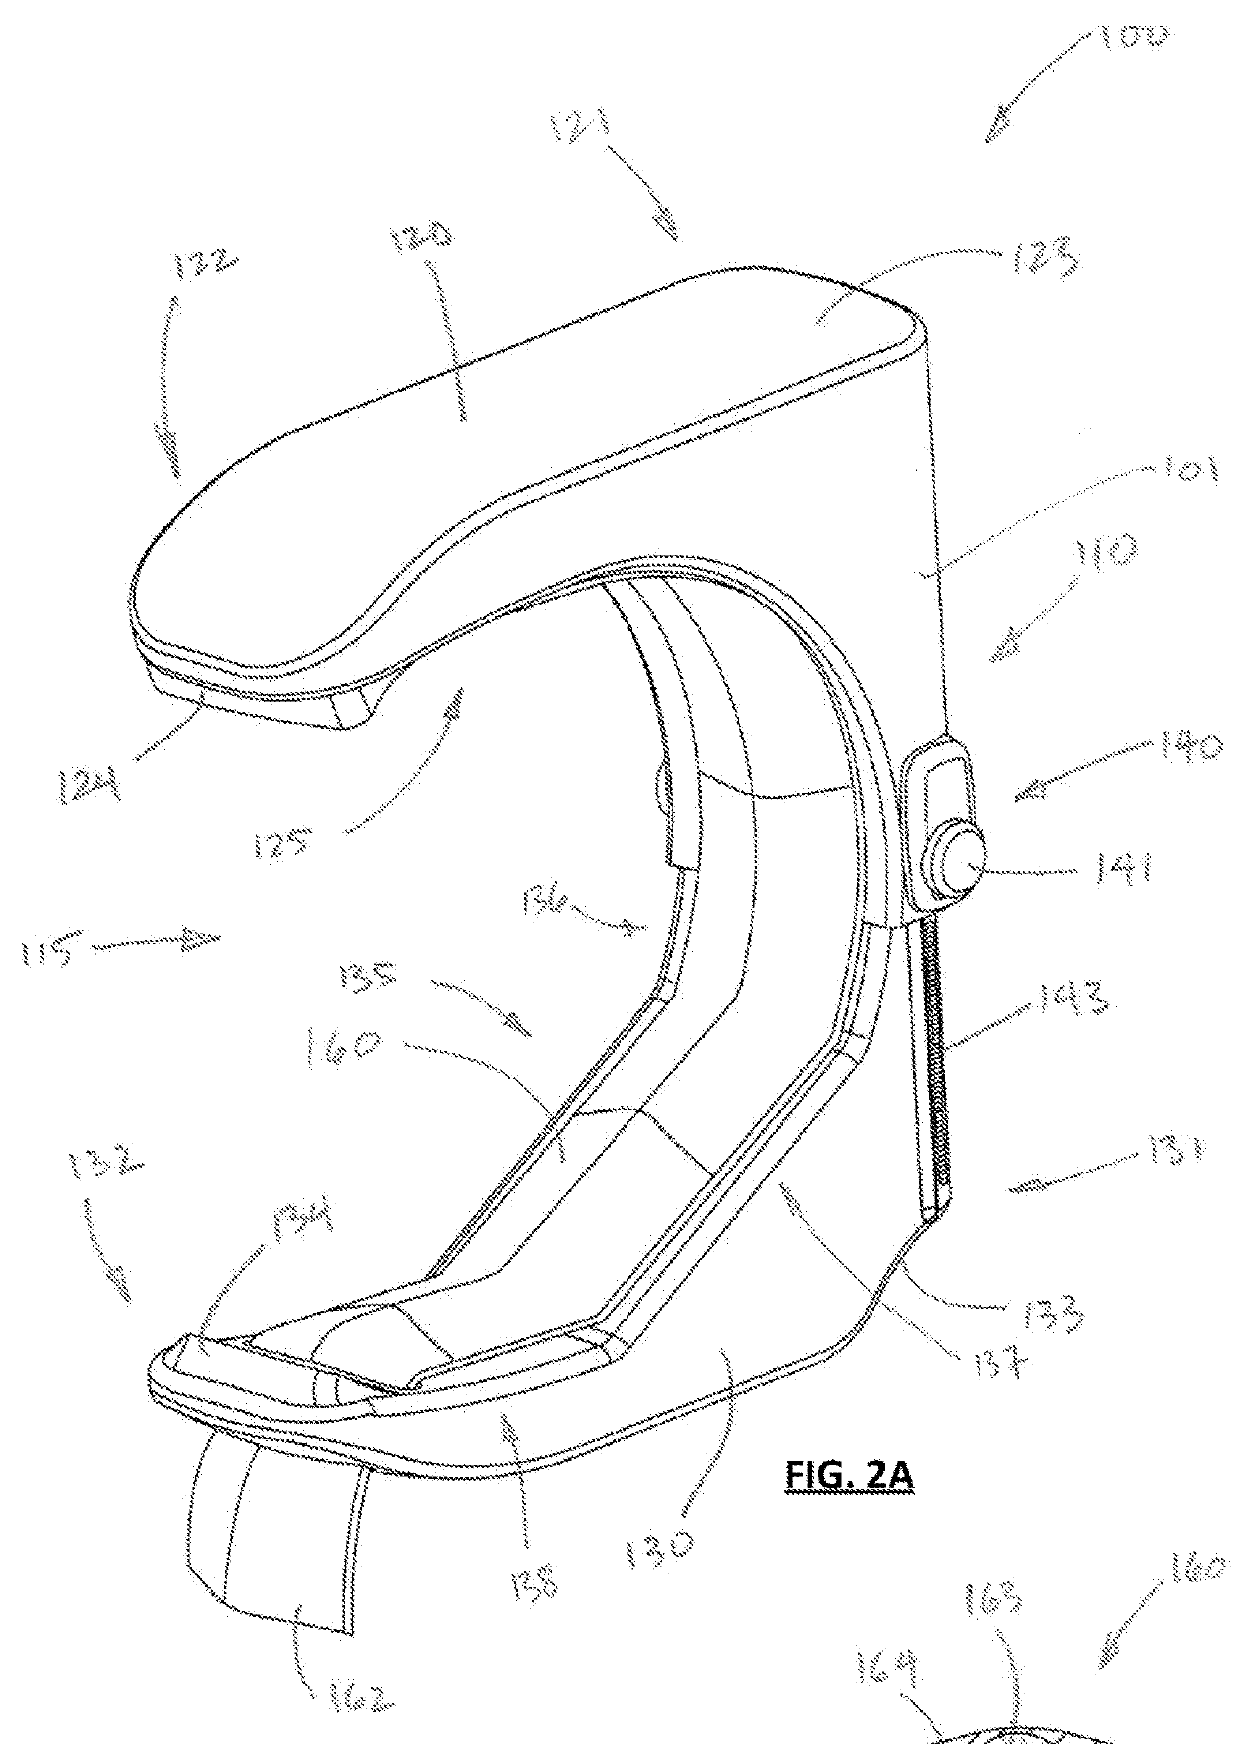 Clamping device for reducing venous blood flow